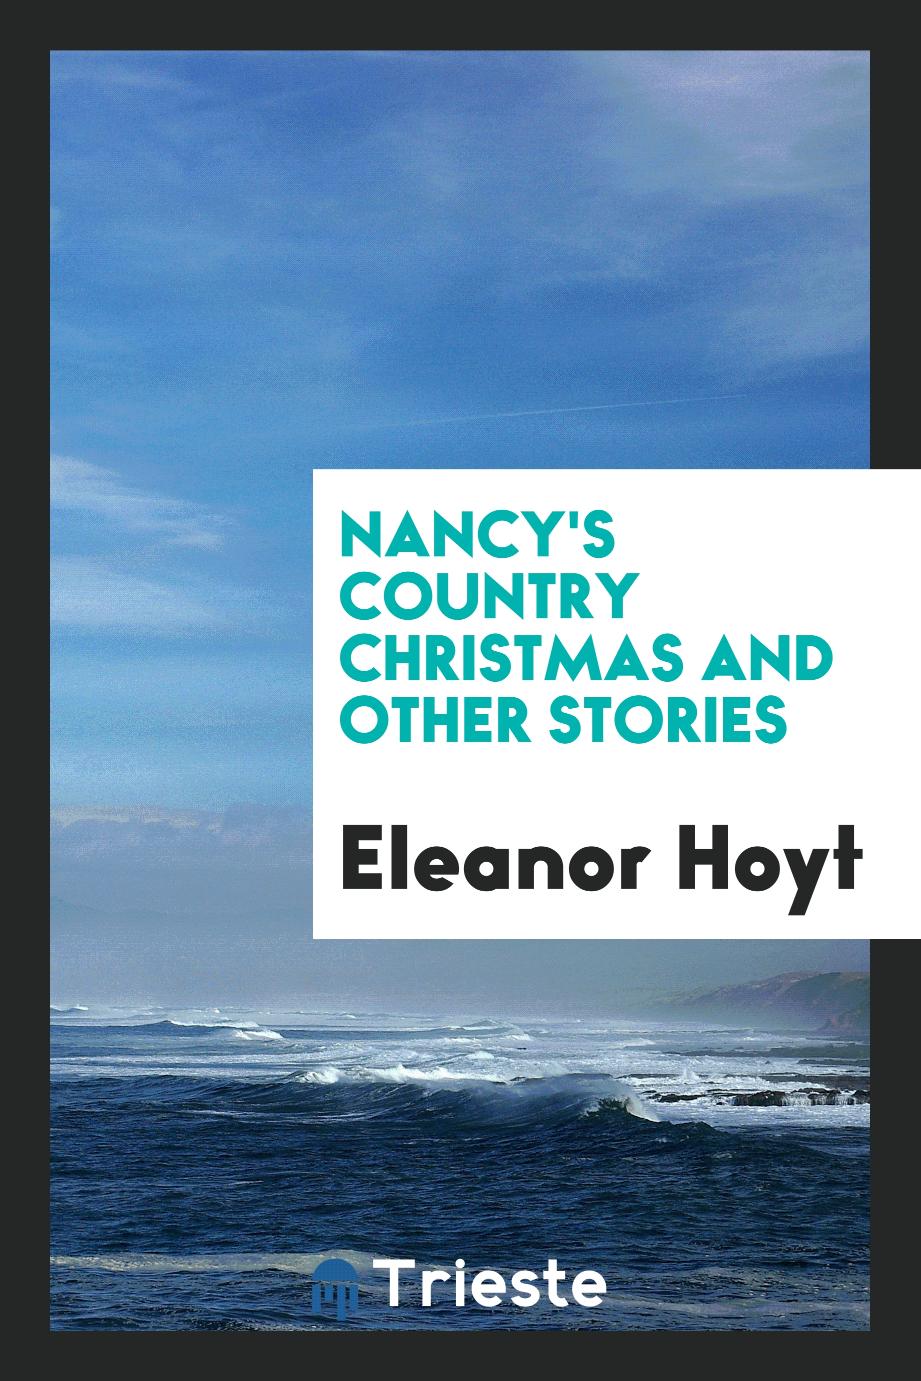 Nancy's country Christmas and other stories